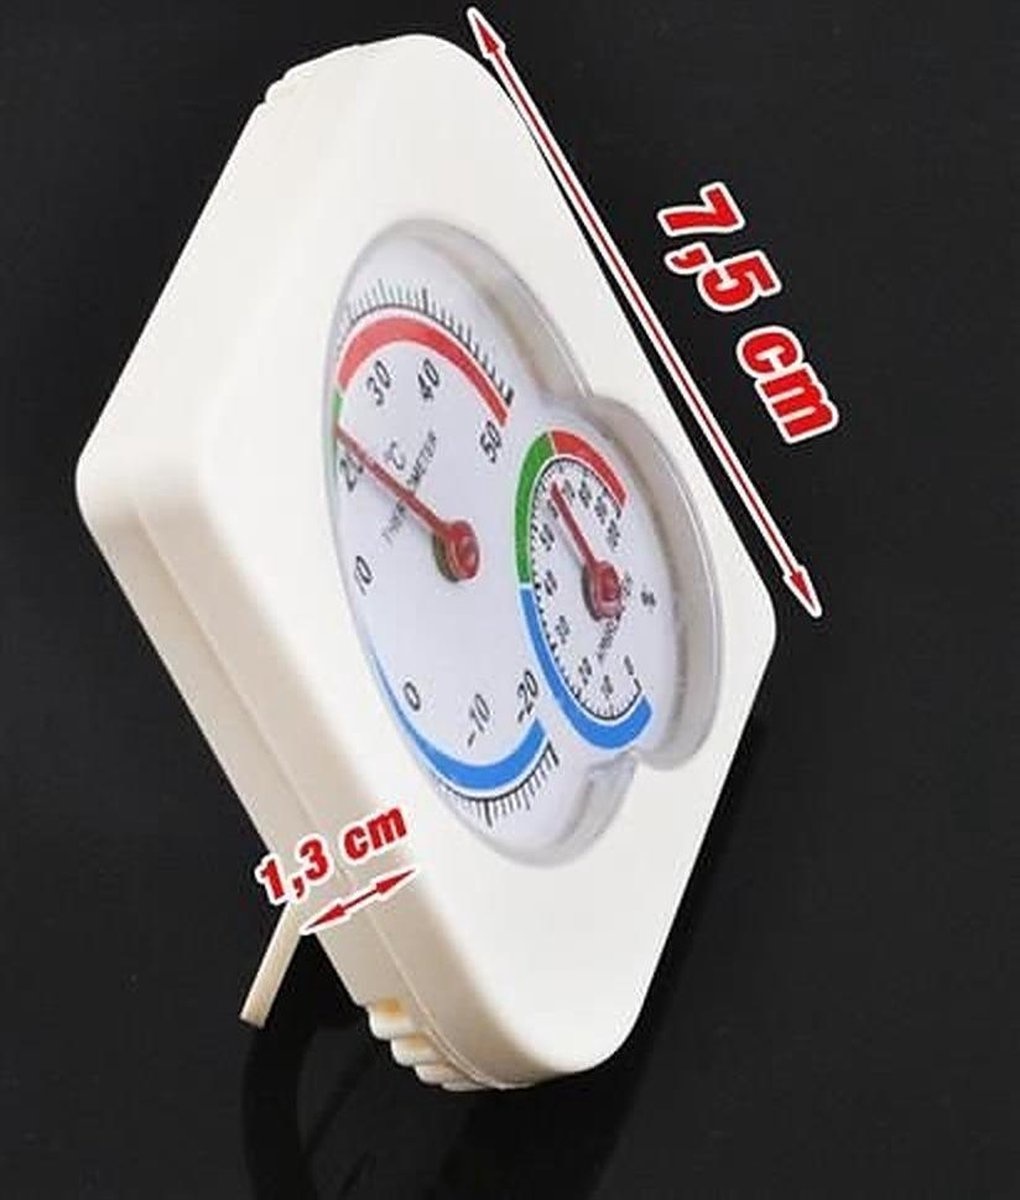 https://cdn.webshopapp.com/shops/38765/files/409422677/thermometer-hygrometer-analog-indoor-and-outdoor-w.jpg